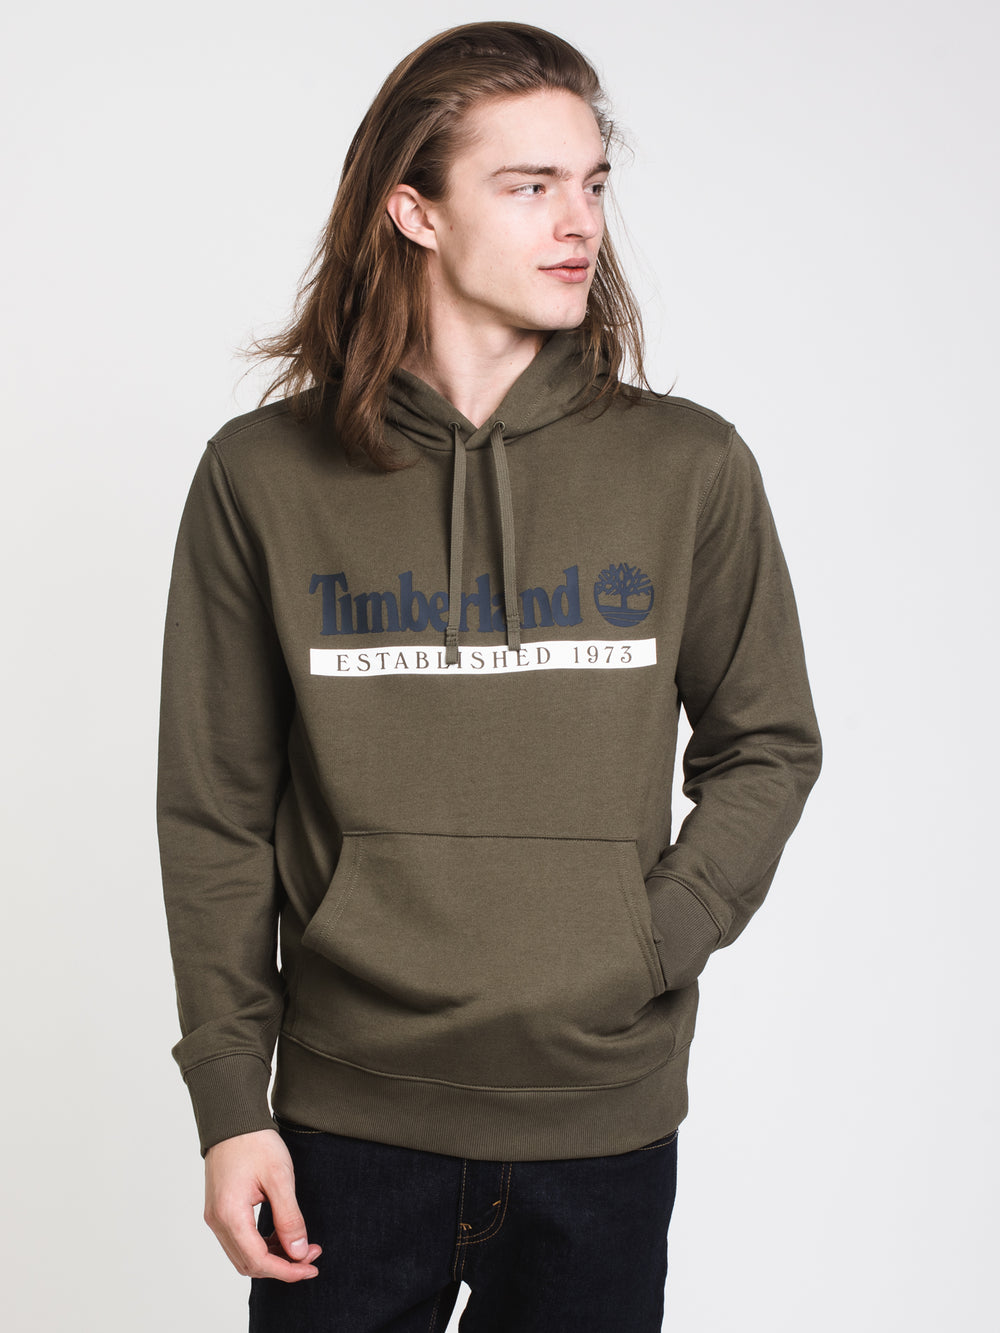 TIMBERLAND EST.LISHED 1973 PULLOVER HOODIE  - CLEARANCE